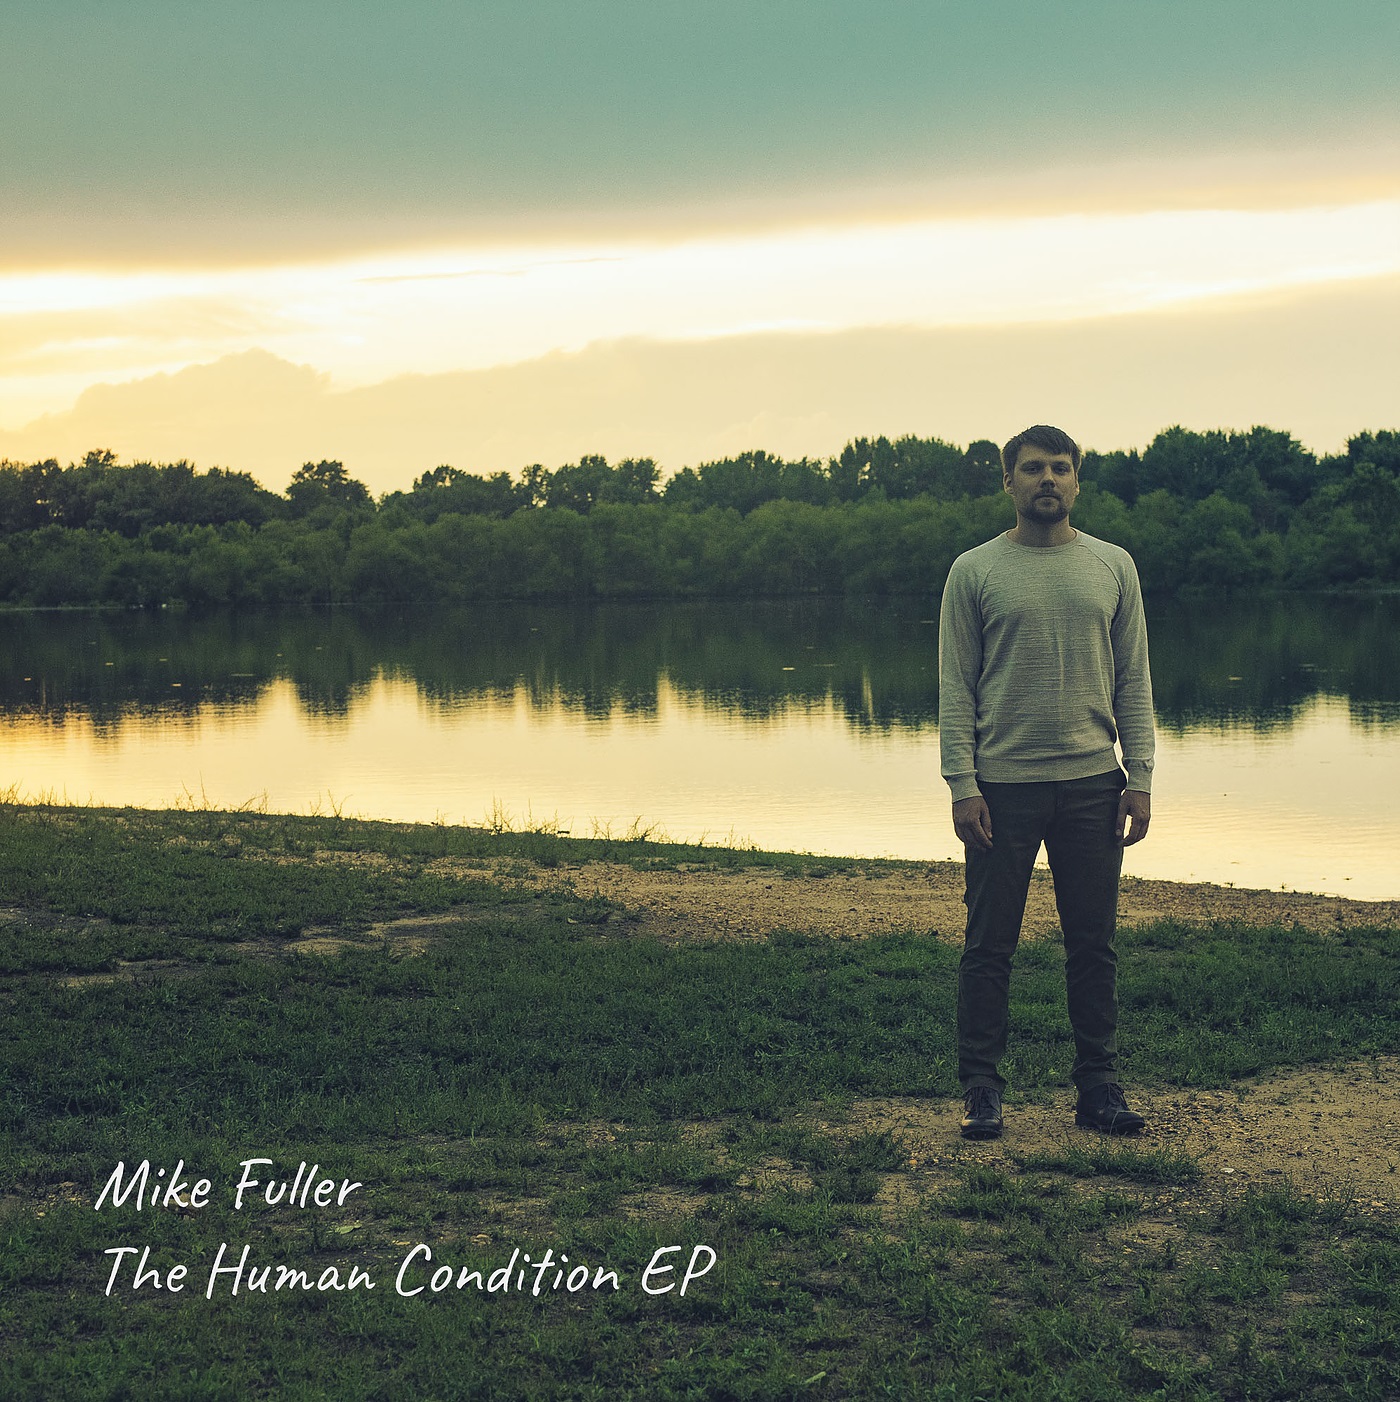 Mike Fuller Launches ‘The Human Condition EP’